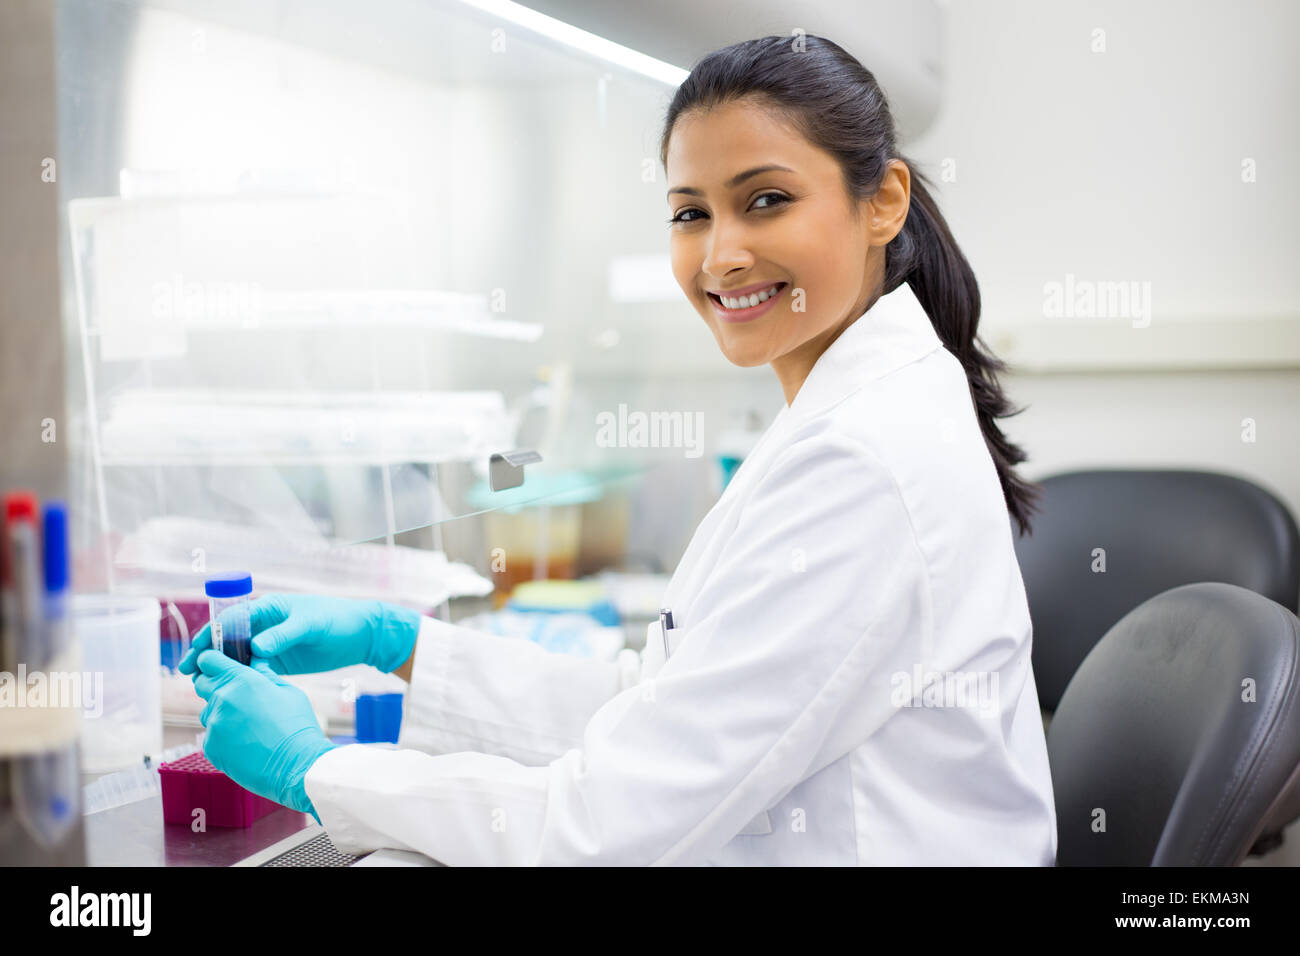 Closeup portrait, scientist holding 50 mL conical tube with blue liquid solution, laboratory experiments Stock Photo